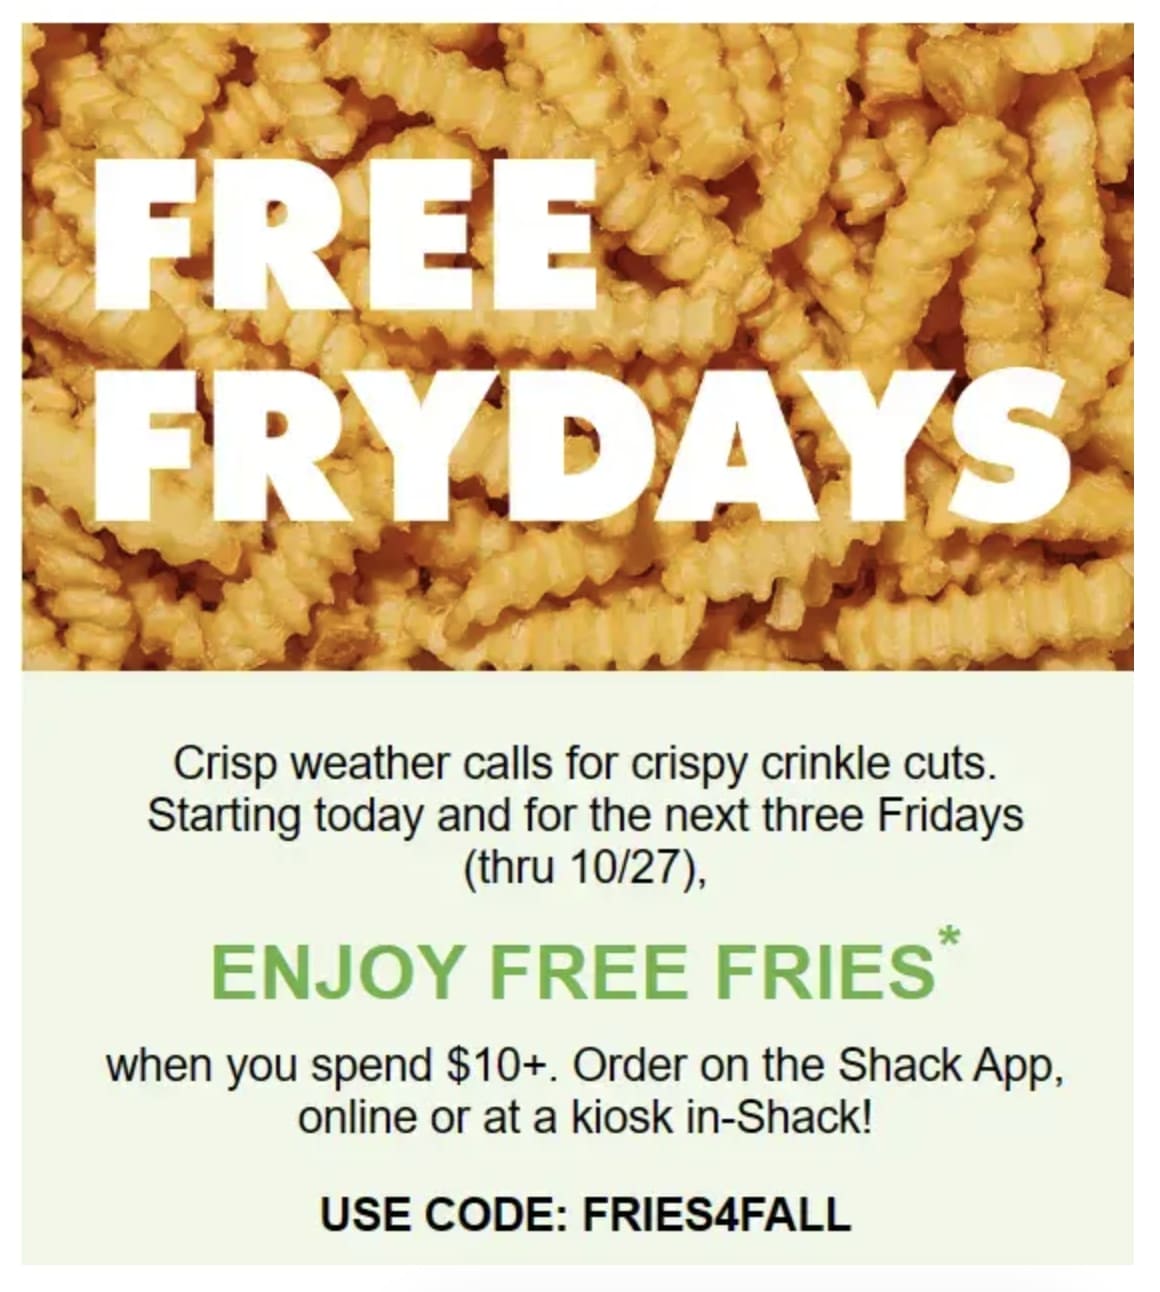 Get Cheap Fries from Shake Shack this Fall